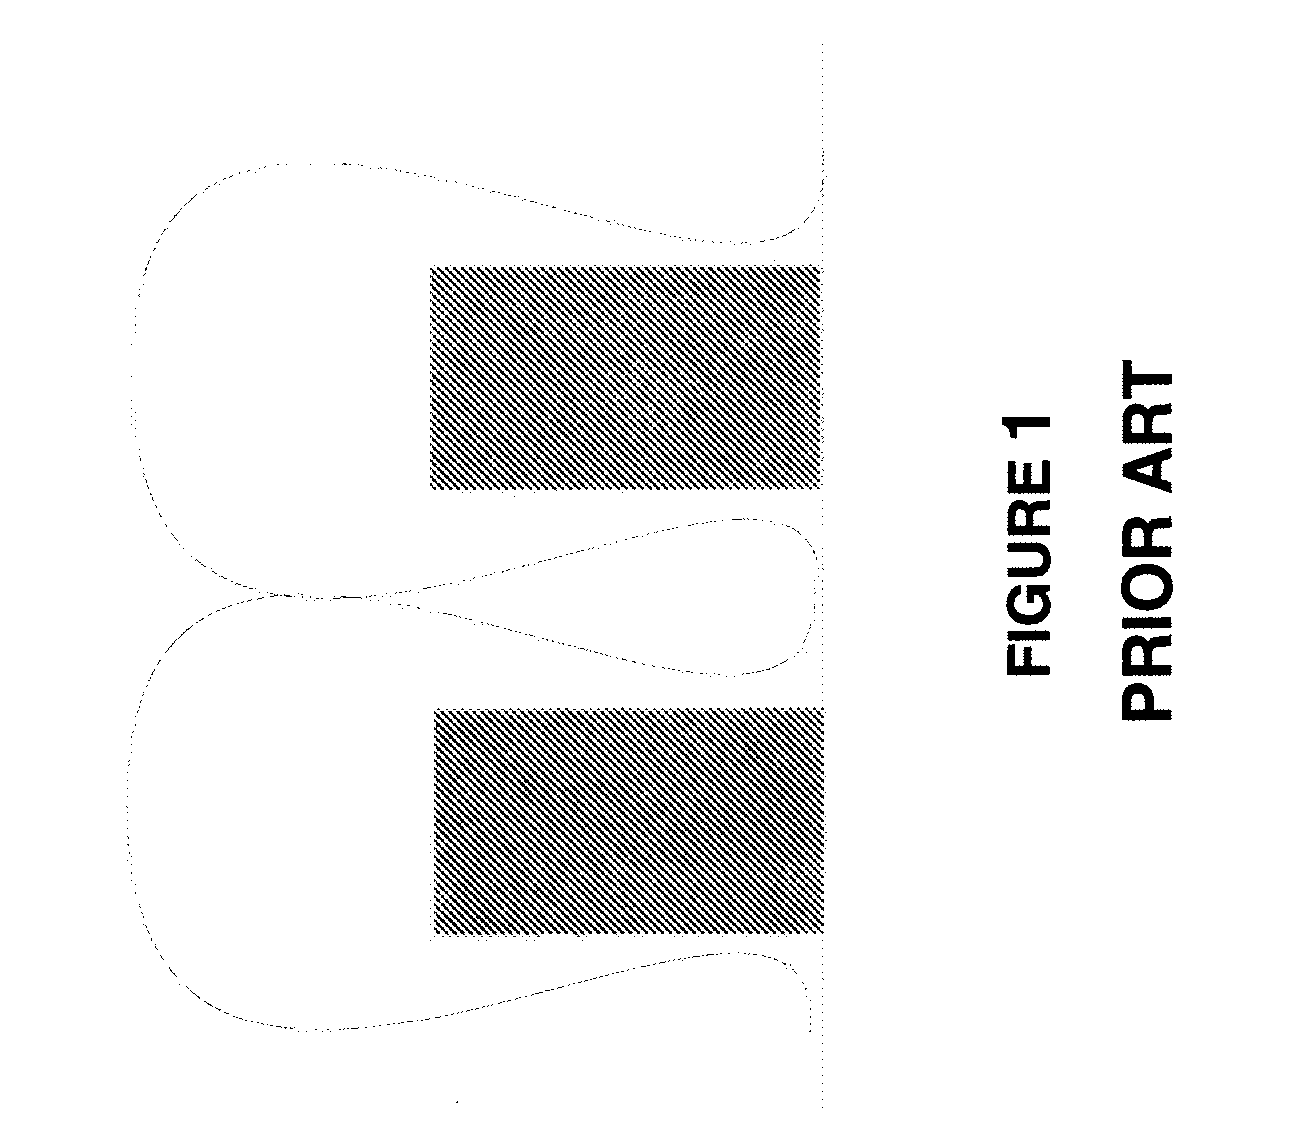 Materials and methods of forming controlled void